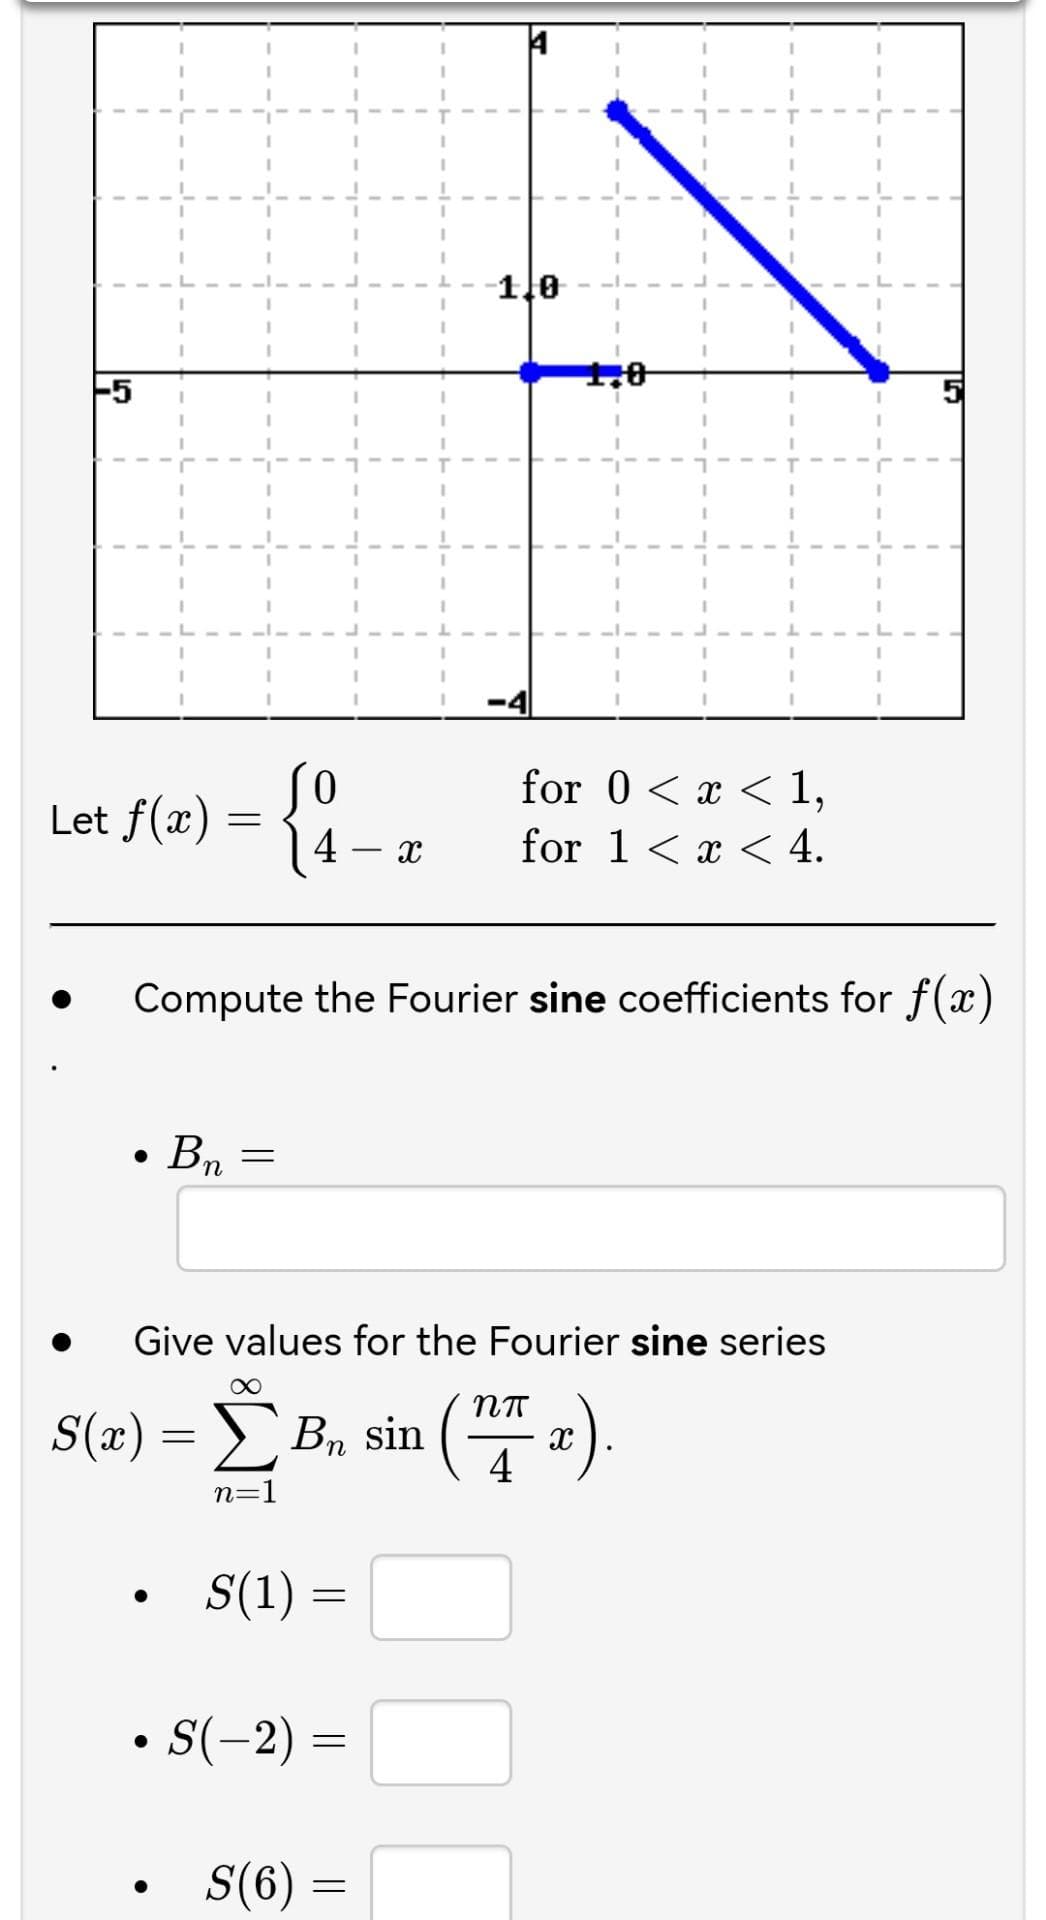 1,0
1,0
-5
so
4 – x
for 0< x < 1,
for 1< x < 4.
Let f(x) =
-
Compute the Fourier sine coefficients for f(x)
Bn
Give values for the Fourier sine series
S(x) = > Bn sin
Σ
n=1
S(1)
• S(-2) =
S(6) =
